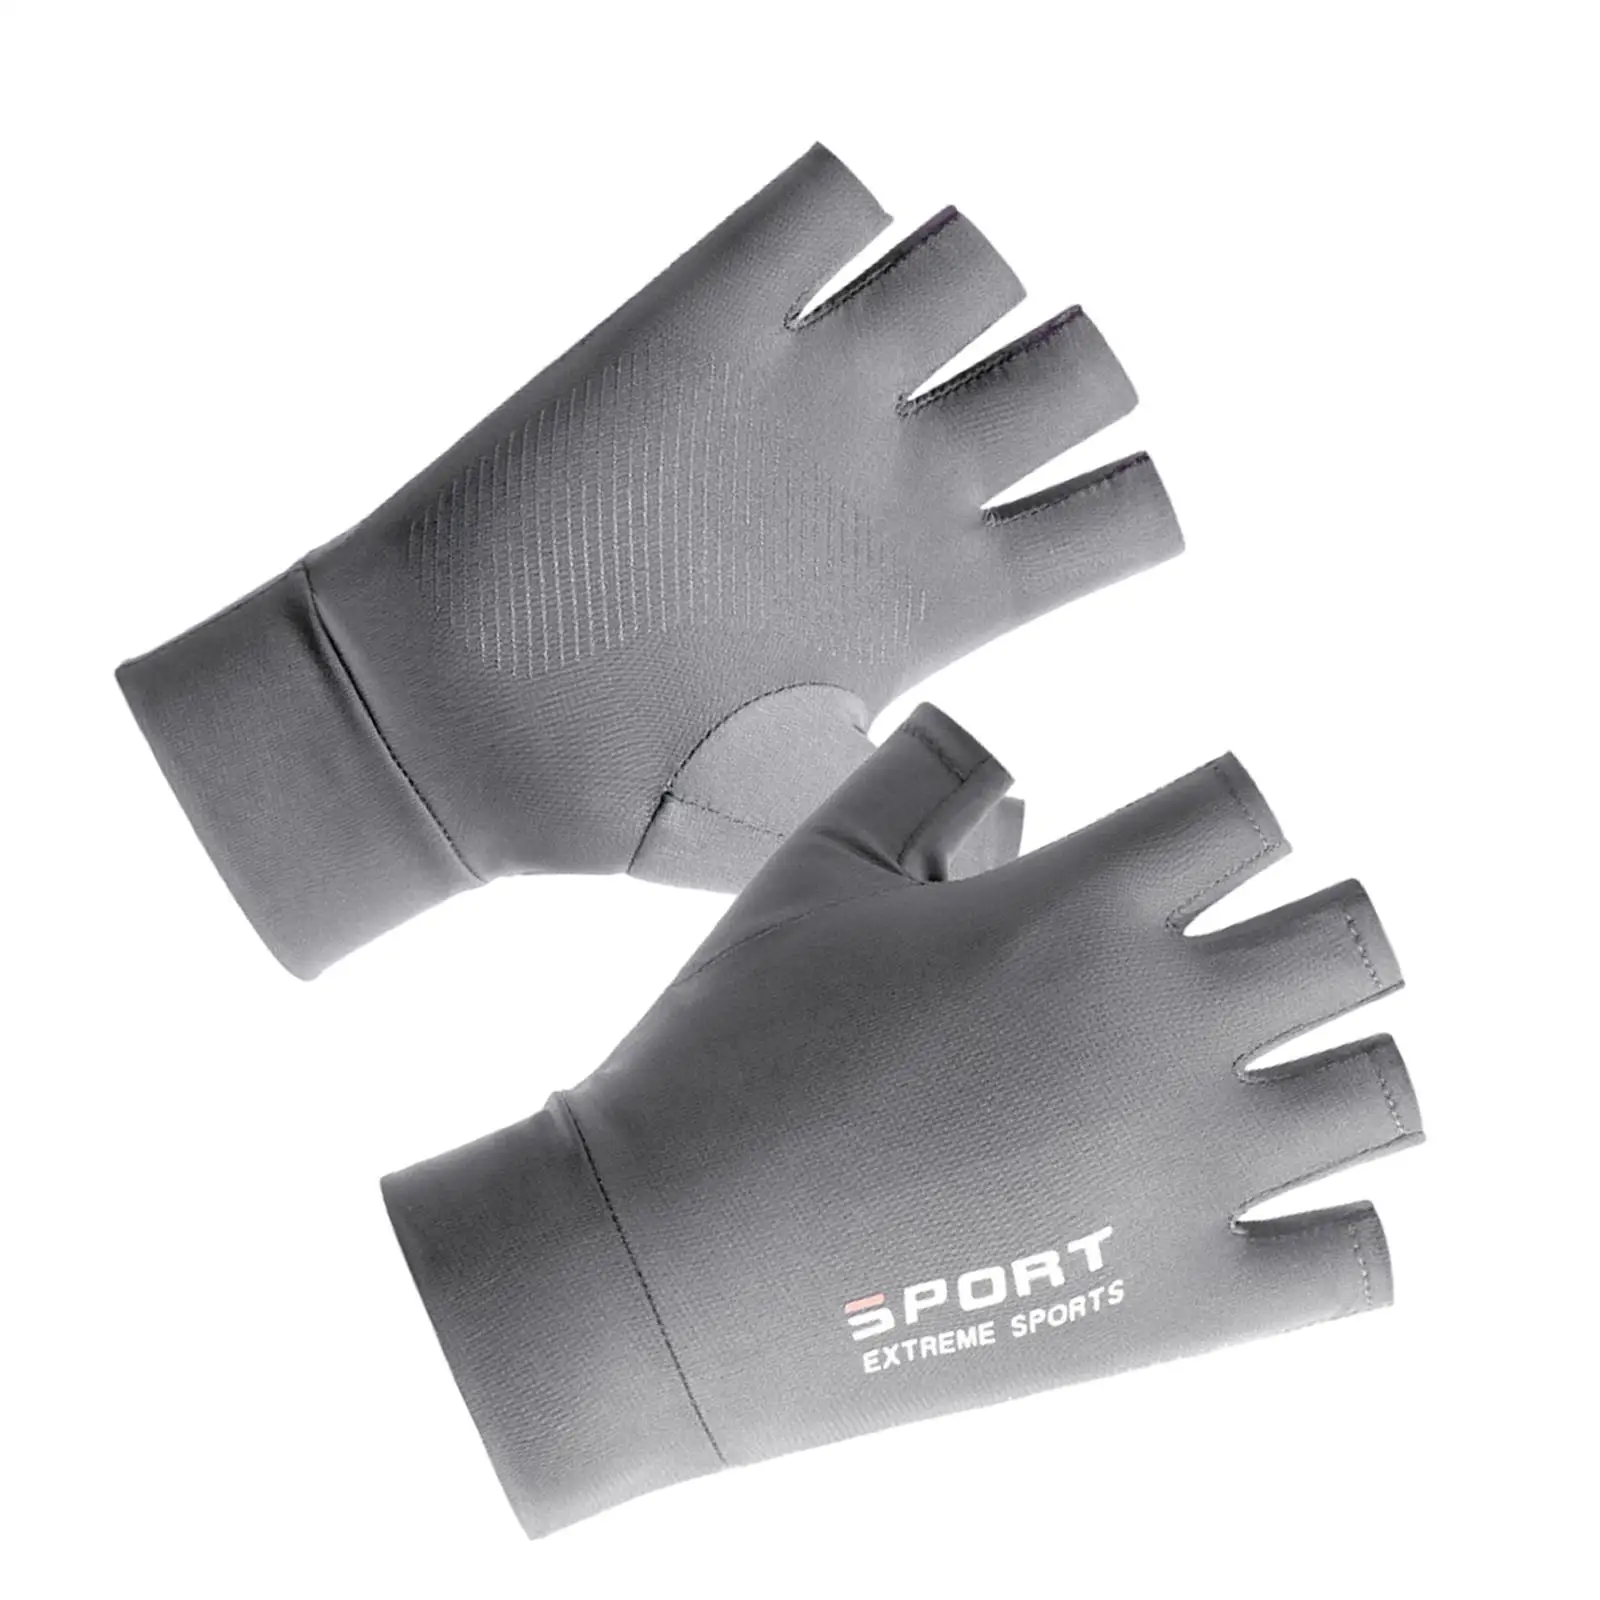 Women Men Ice Silk Gloves Non Slip Breathable Fishing Cycling Driving